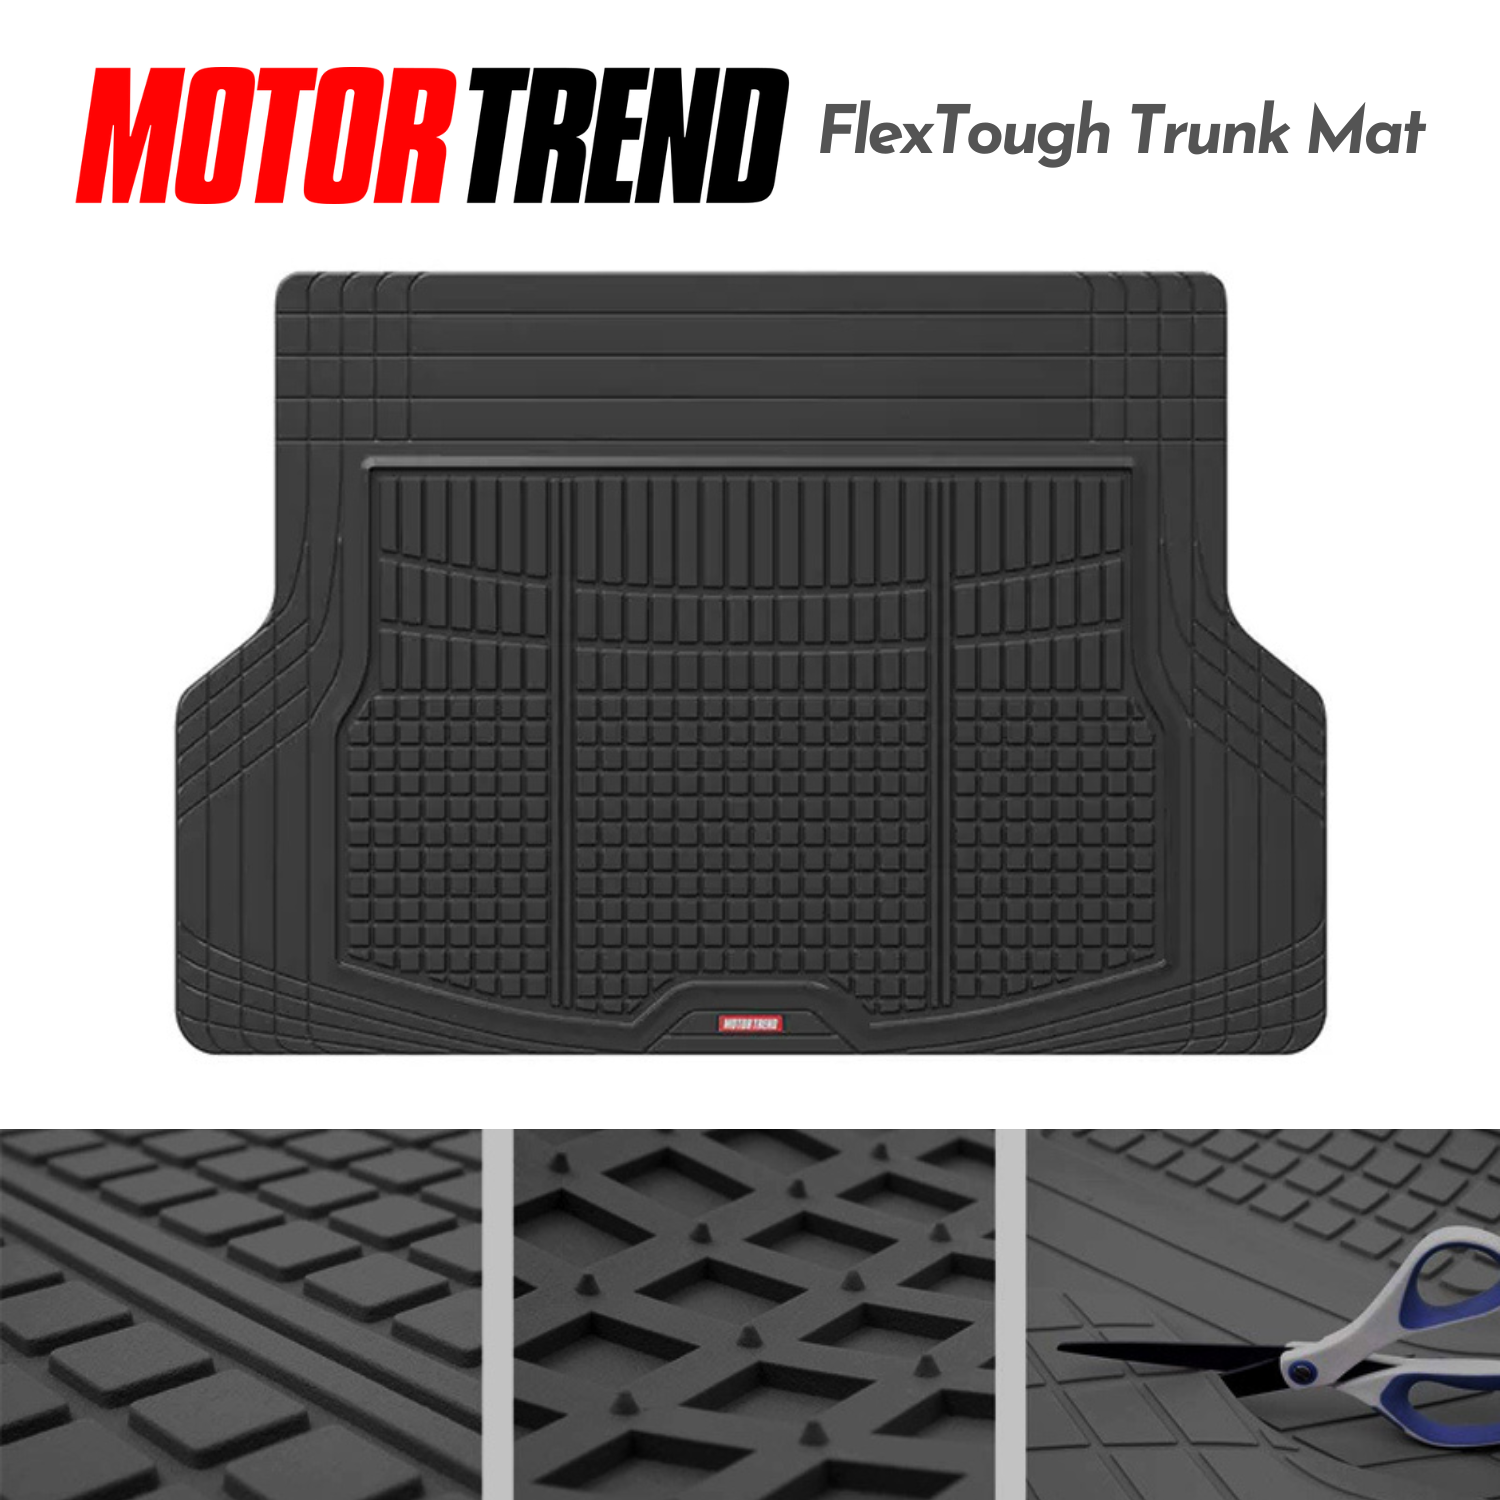 MotorTrend Premium FlexTough All-Protection Cargo Mat Liner Deep Dish  Heavy Duty Rubber Car Floor Mats for Car SUV Truck Van All Weather  Protection Universal Trim to Fit w/ Traction Grips